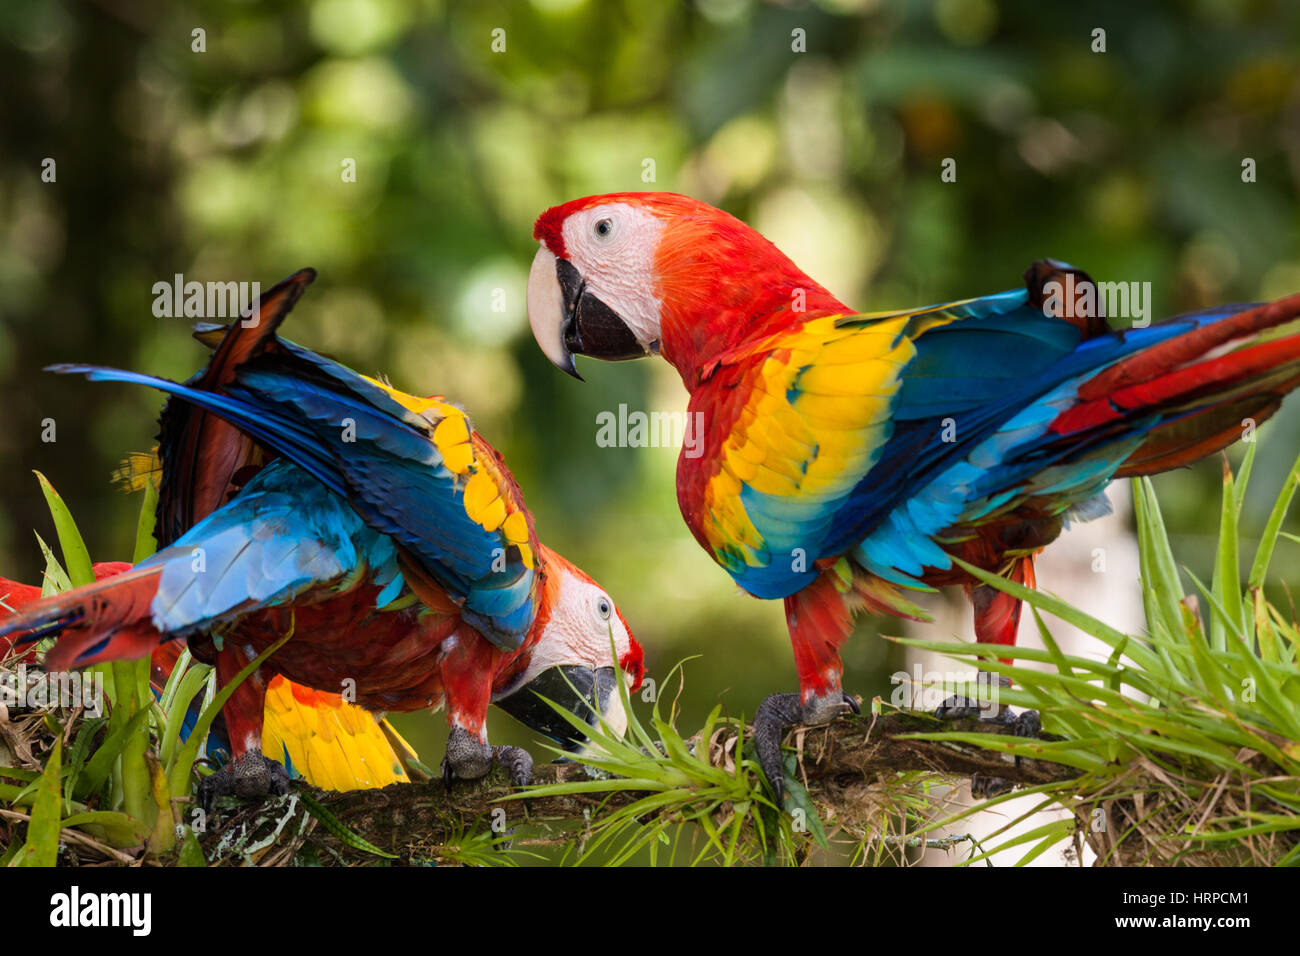 The Scarlet Macaw, Ara macao, is a large, colorful parrot found from Mexico to Brazil.  Photographed here in Costa Rica. Stock Photo